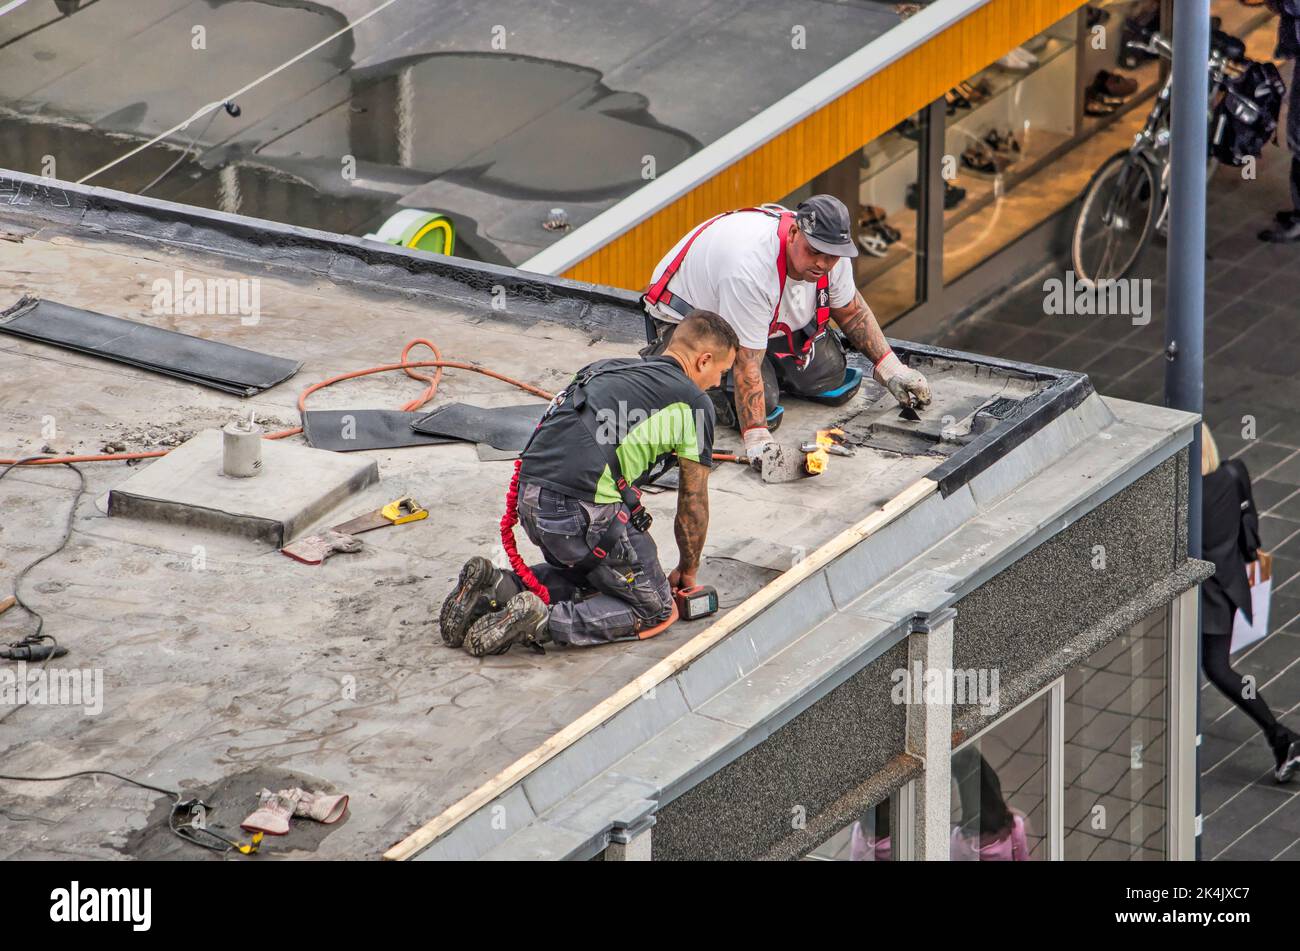 Rotterdam, The Netherlands, July 1, 2020: two workers doing maintenance work on a roof at Lijnbaan shopping street Stock Photo